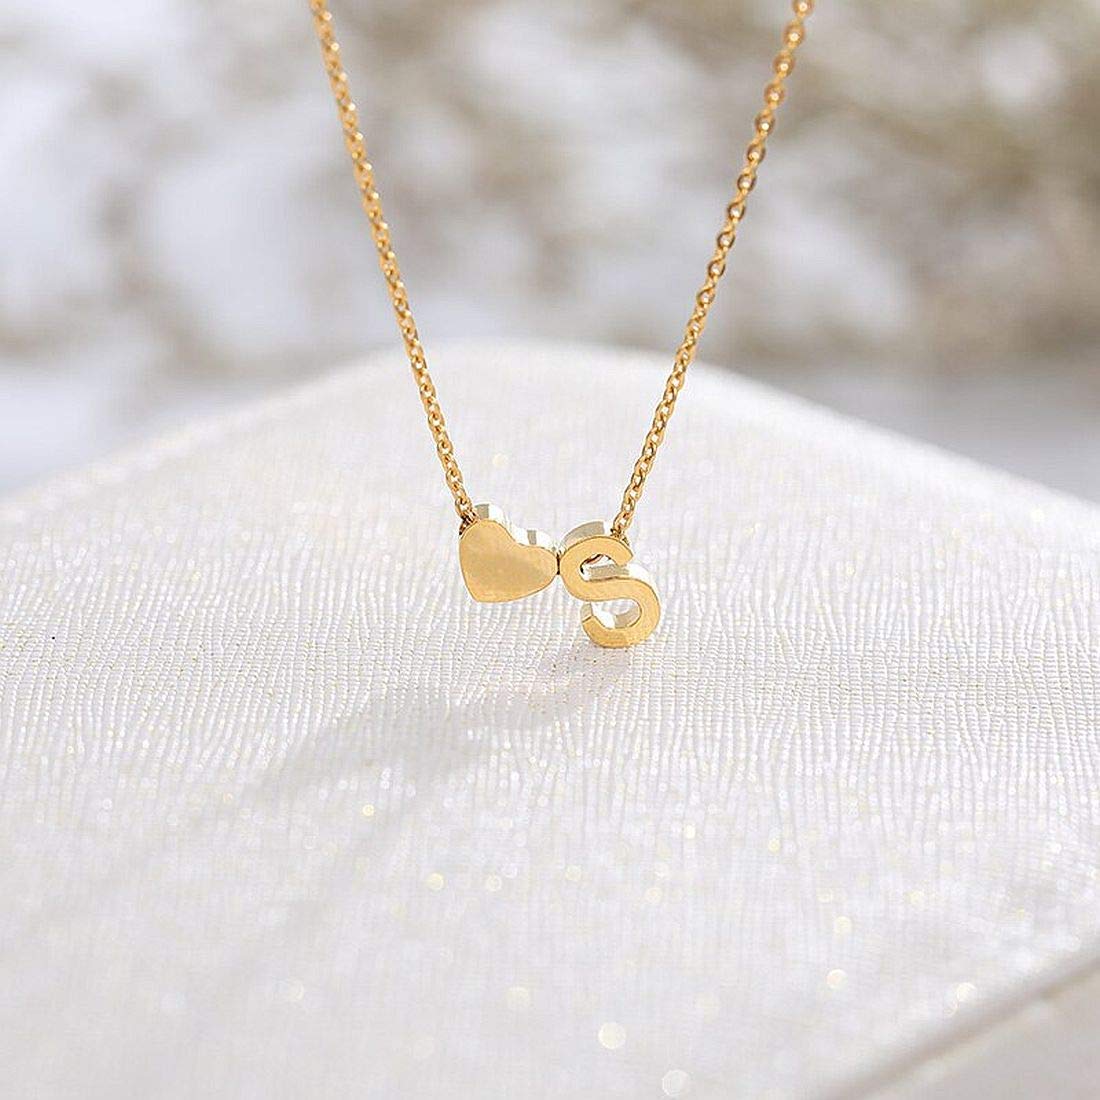 ARZONAI Gorgeous Alphabet 'S' & Tiny Heart Pendant Locket Chain Double Pendant Initial Letter n Cute Heart; Necklace Gift for Girls Women On Birthday Anniversary Valentine Occasions (Gold)